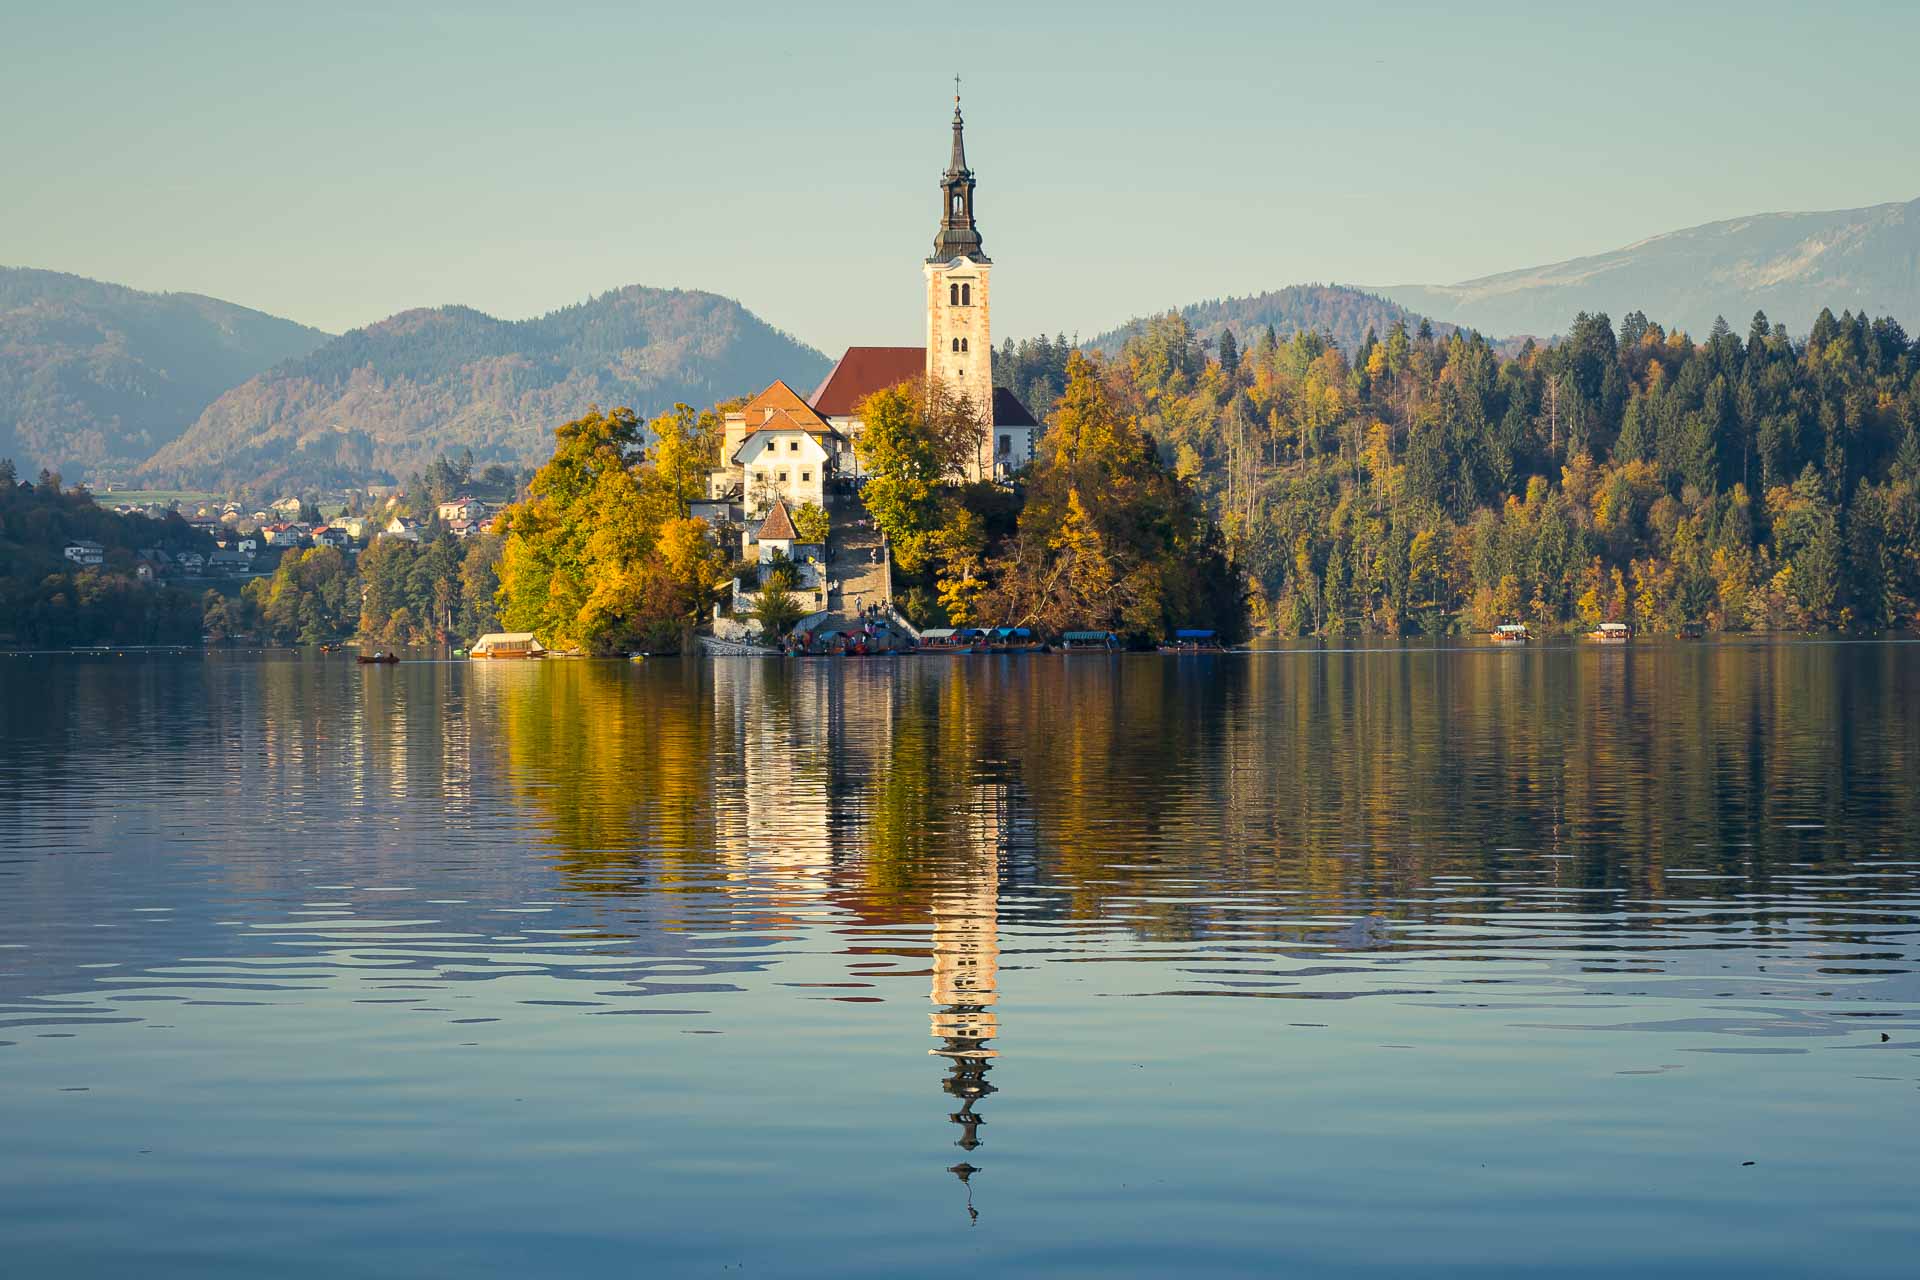 The little island in Lake Bled reflect in the water